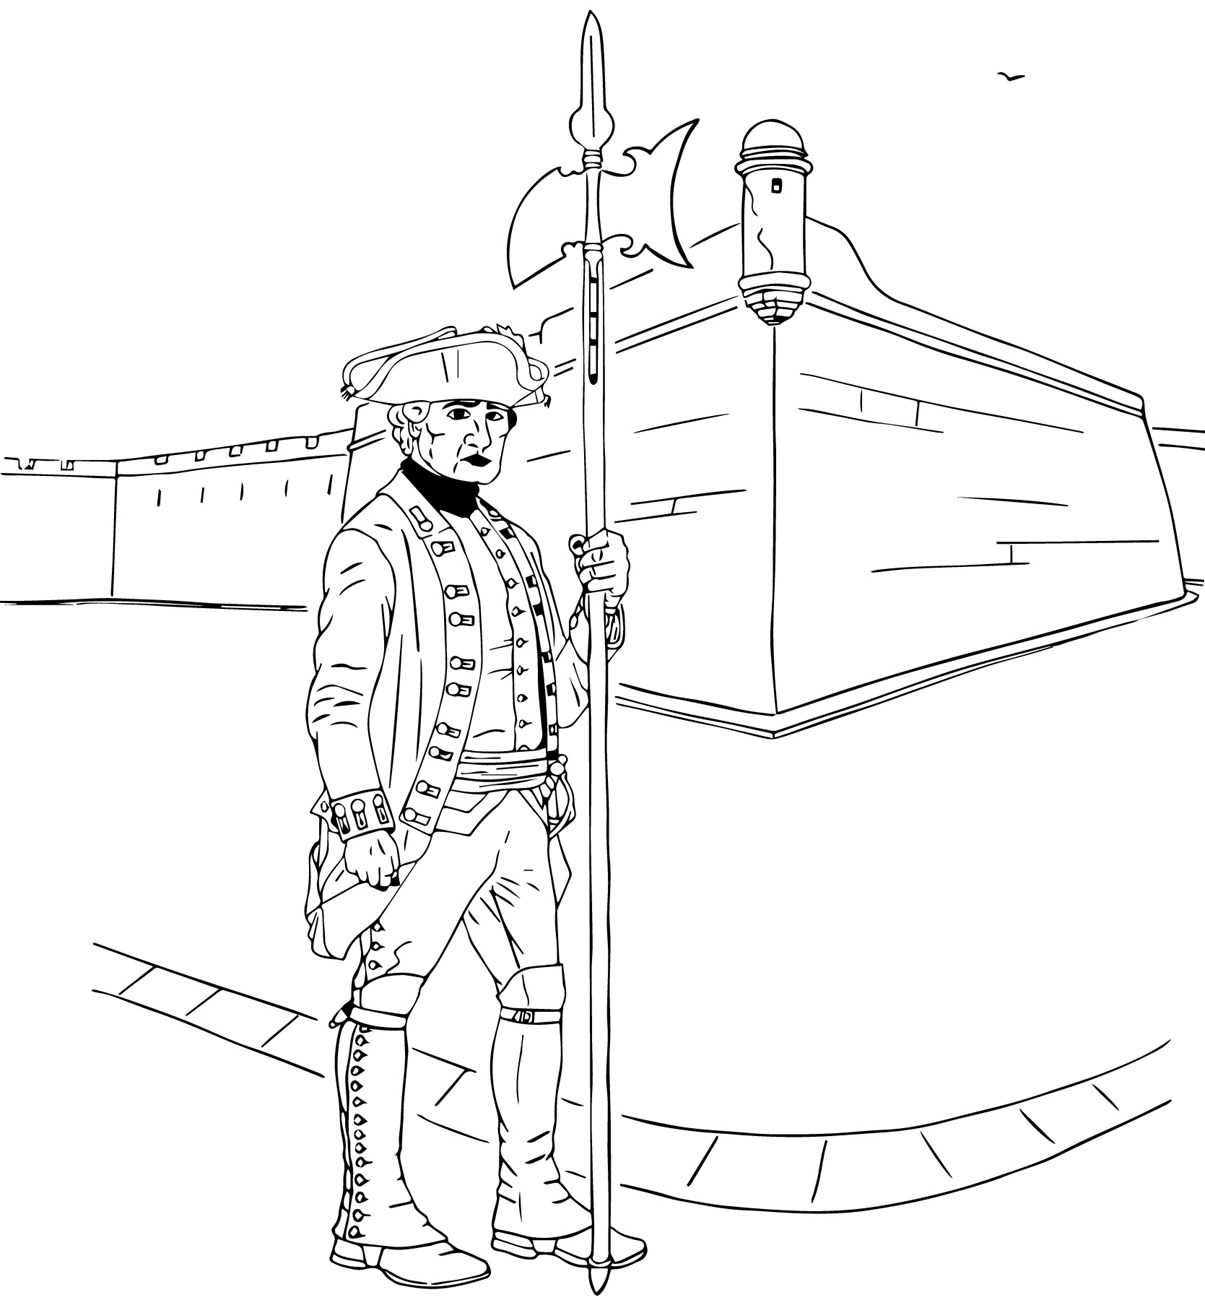 Coloring page of a 1763 British Sergeant standing in front of the Castillo, called Fort St. Mark by the British.